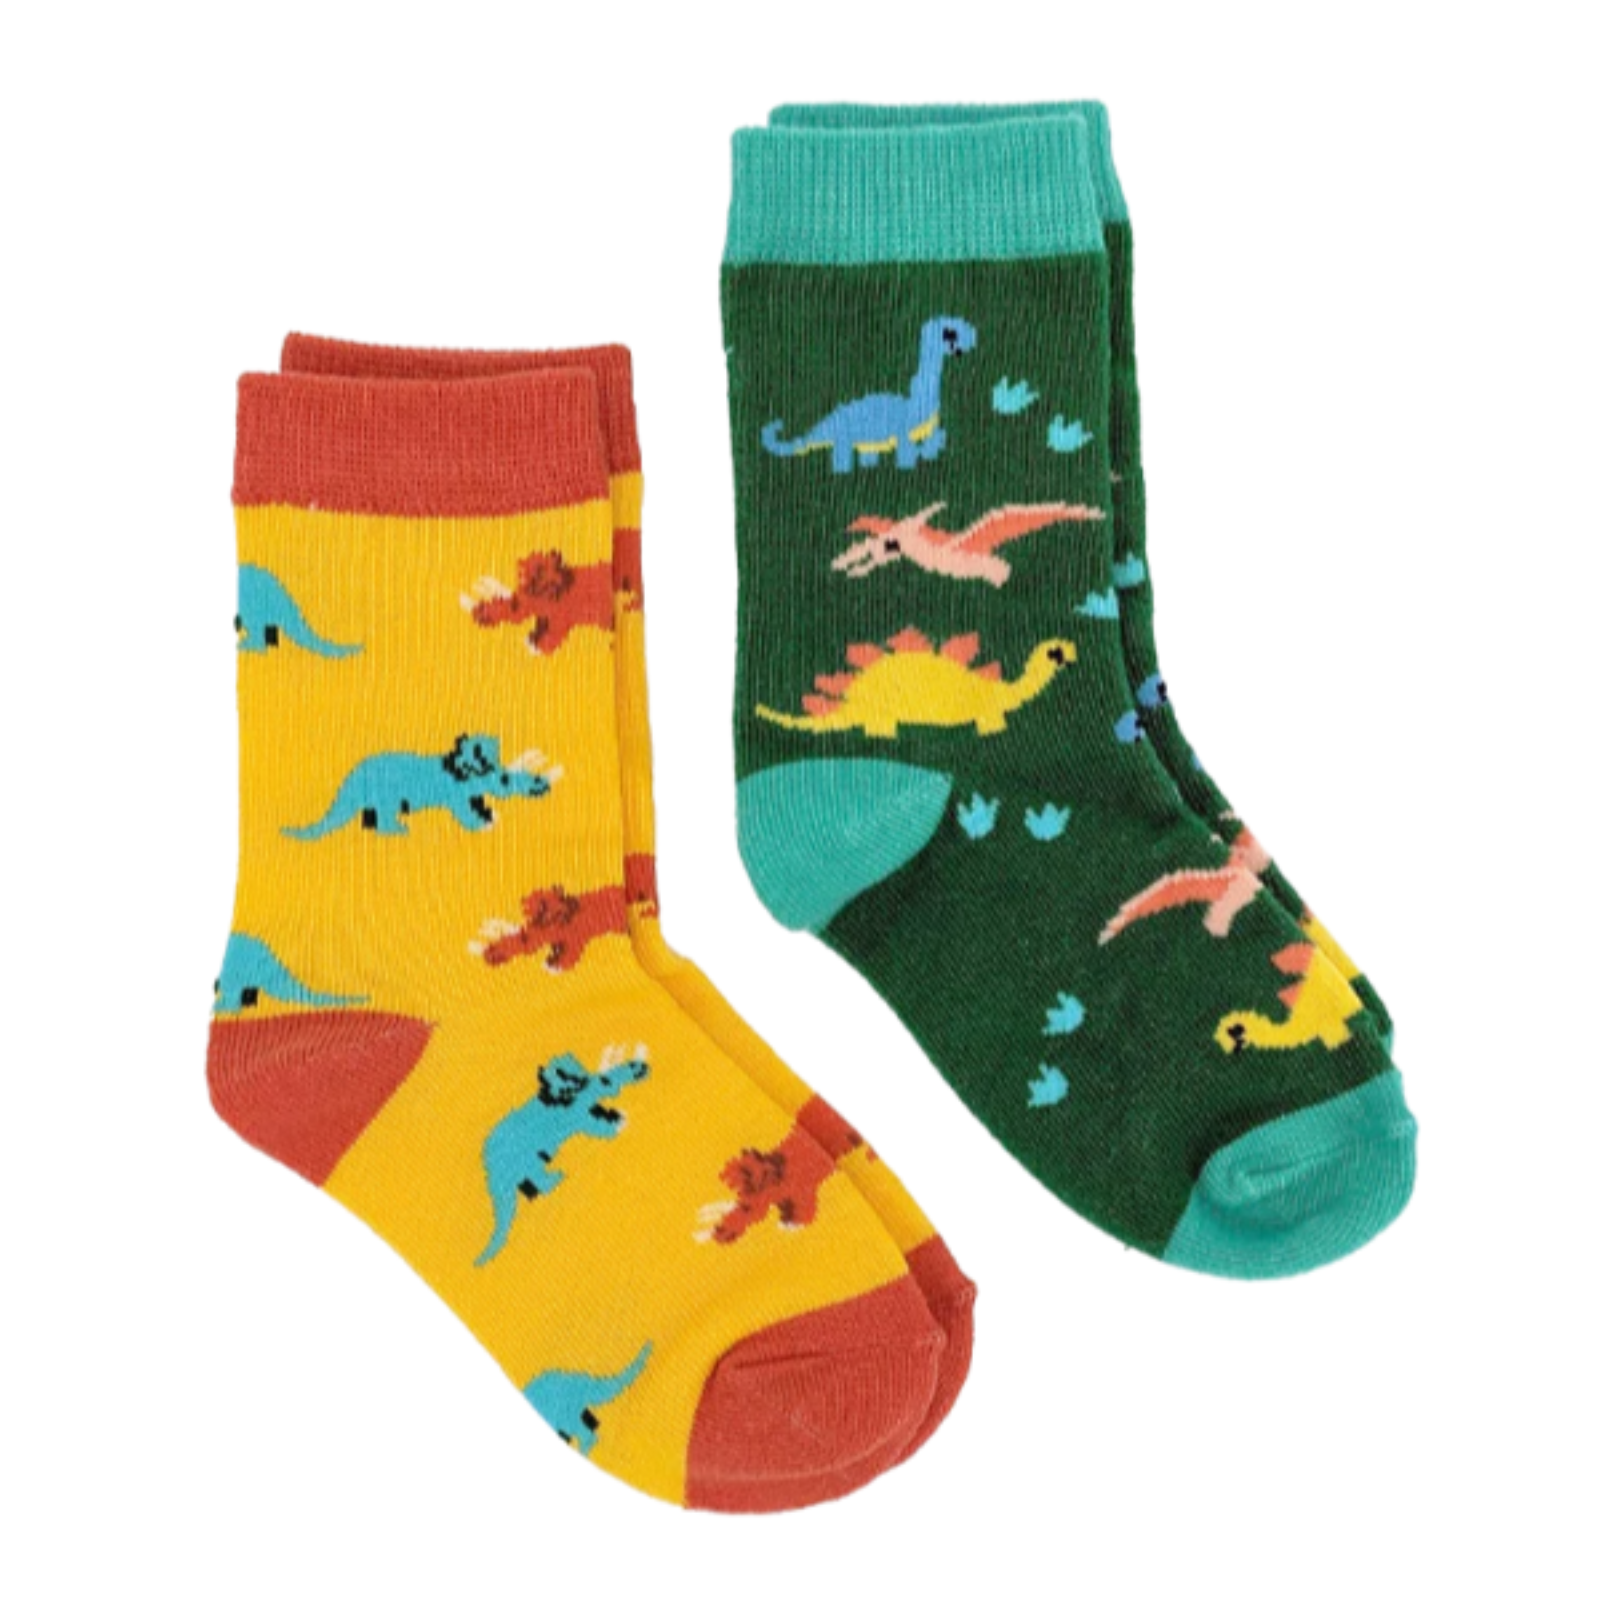 Sock Harbor Dinosaurs 2-pack kids' socks featuring yellow sock with blue and red Triceratops & green sock with blue Brontosaurus and yellow and pink other dinosaurs. Socks shown flat on display. 